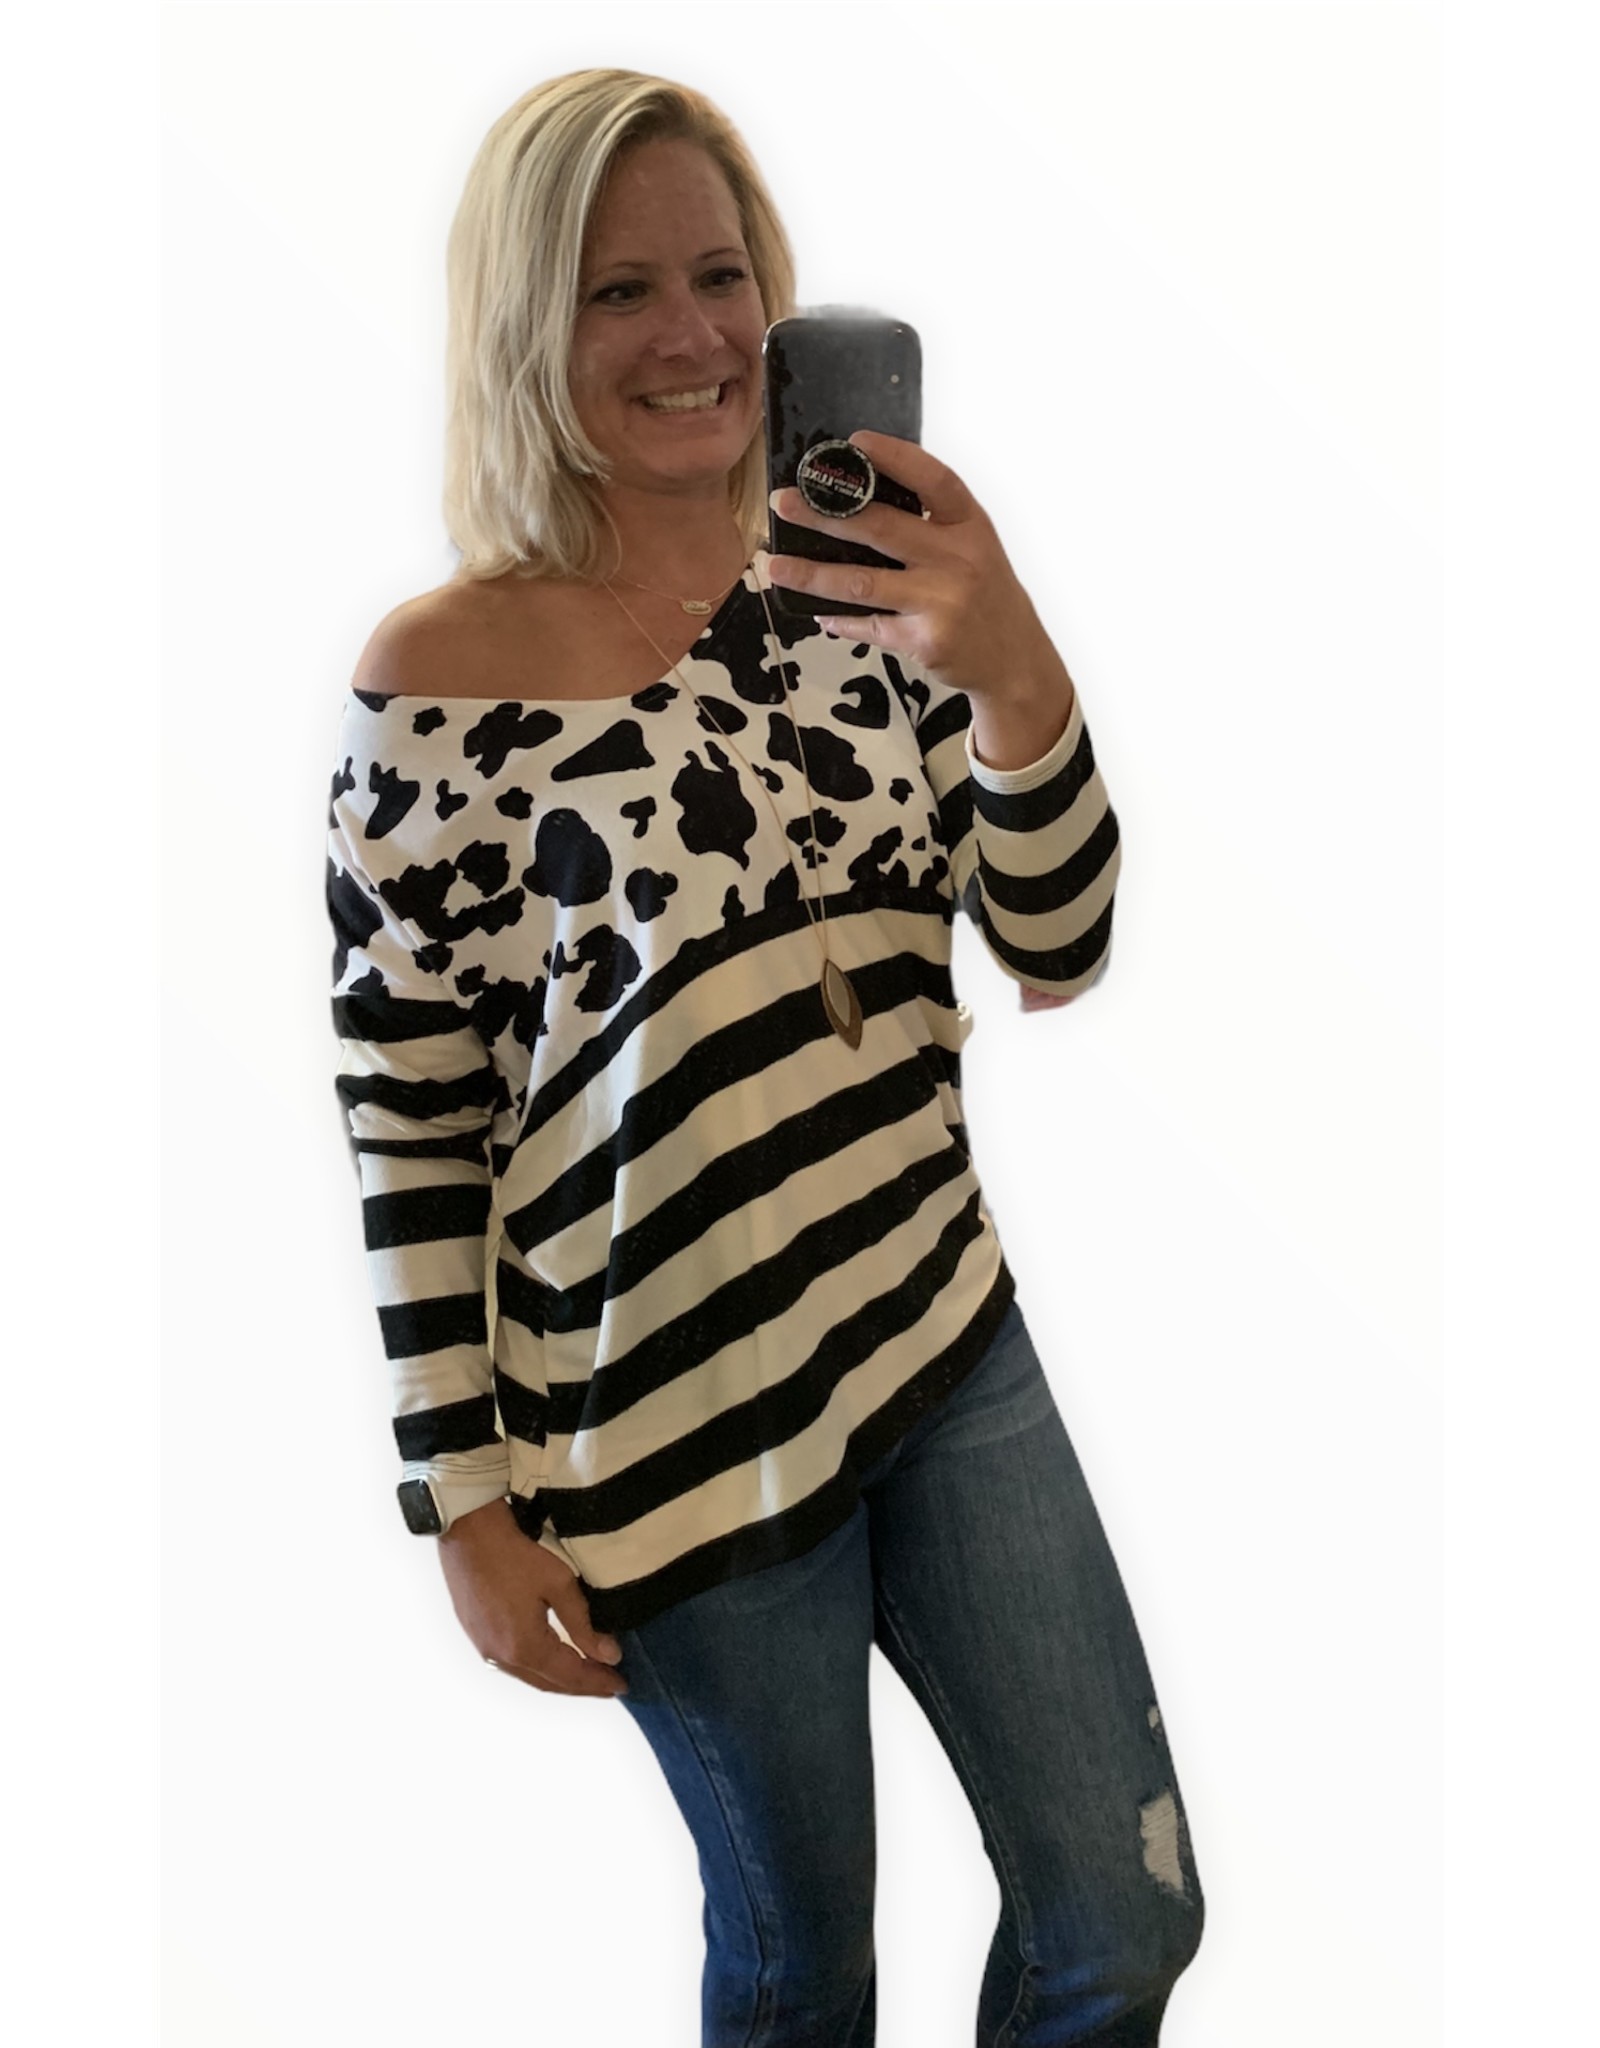 LATA Spotted Print Top